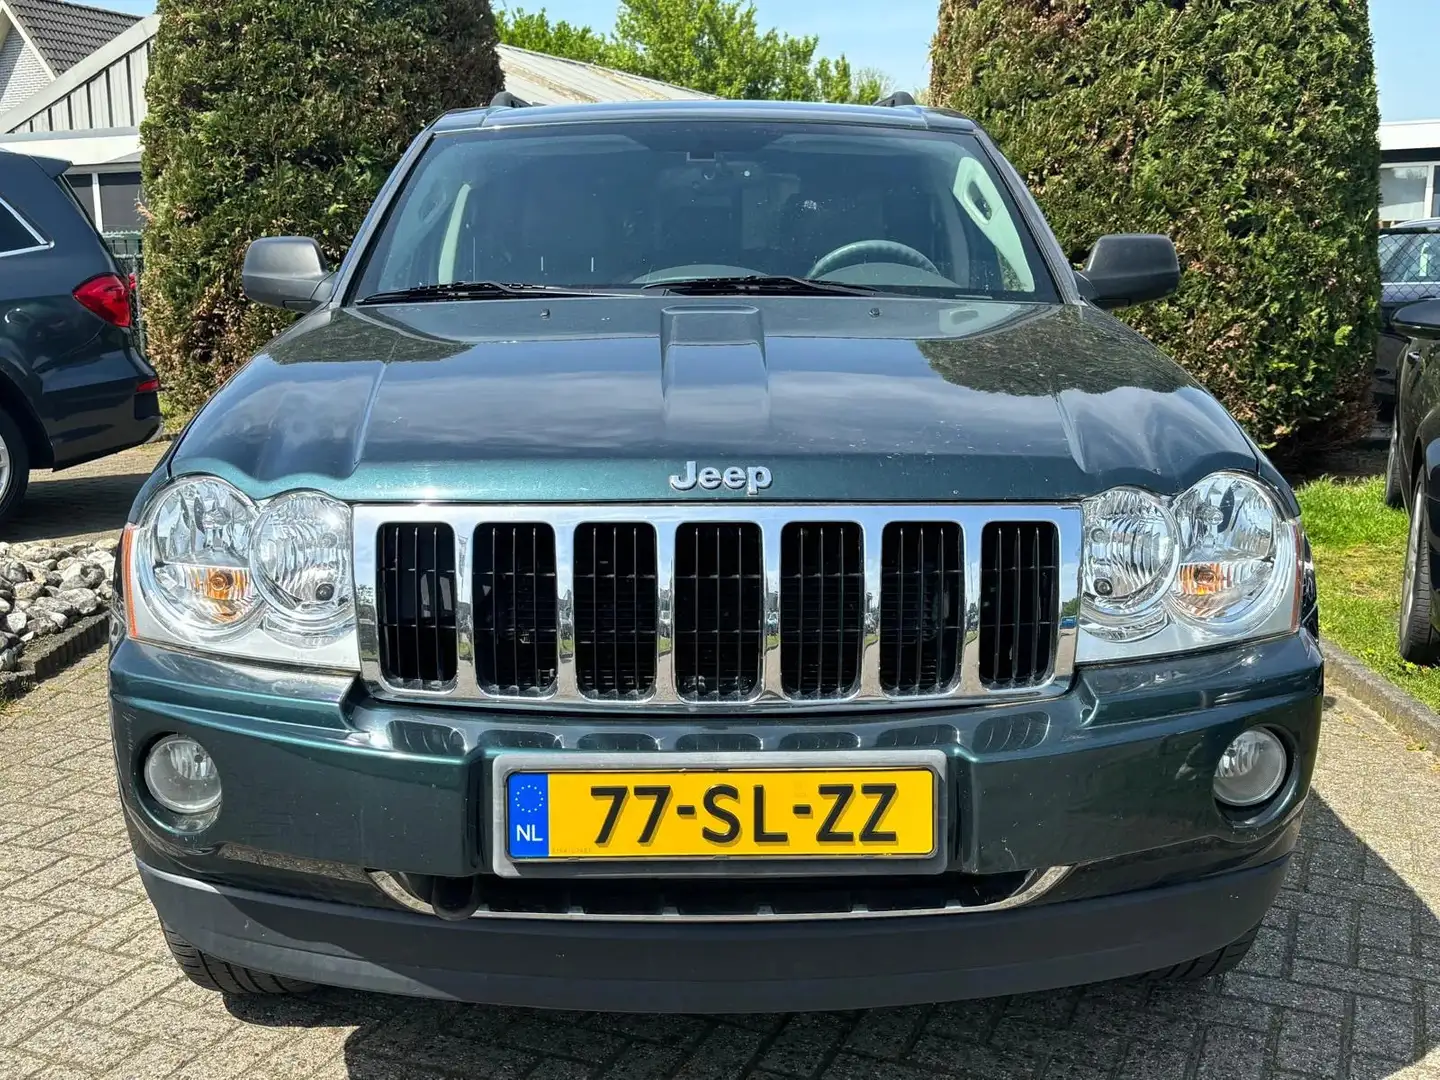 Jeep Grand Cherokee 5.7 V8 Hemi Limited 2005 Youngtimer Green - 2